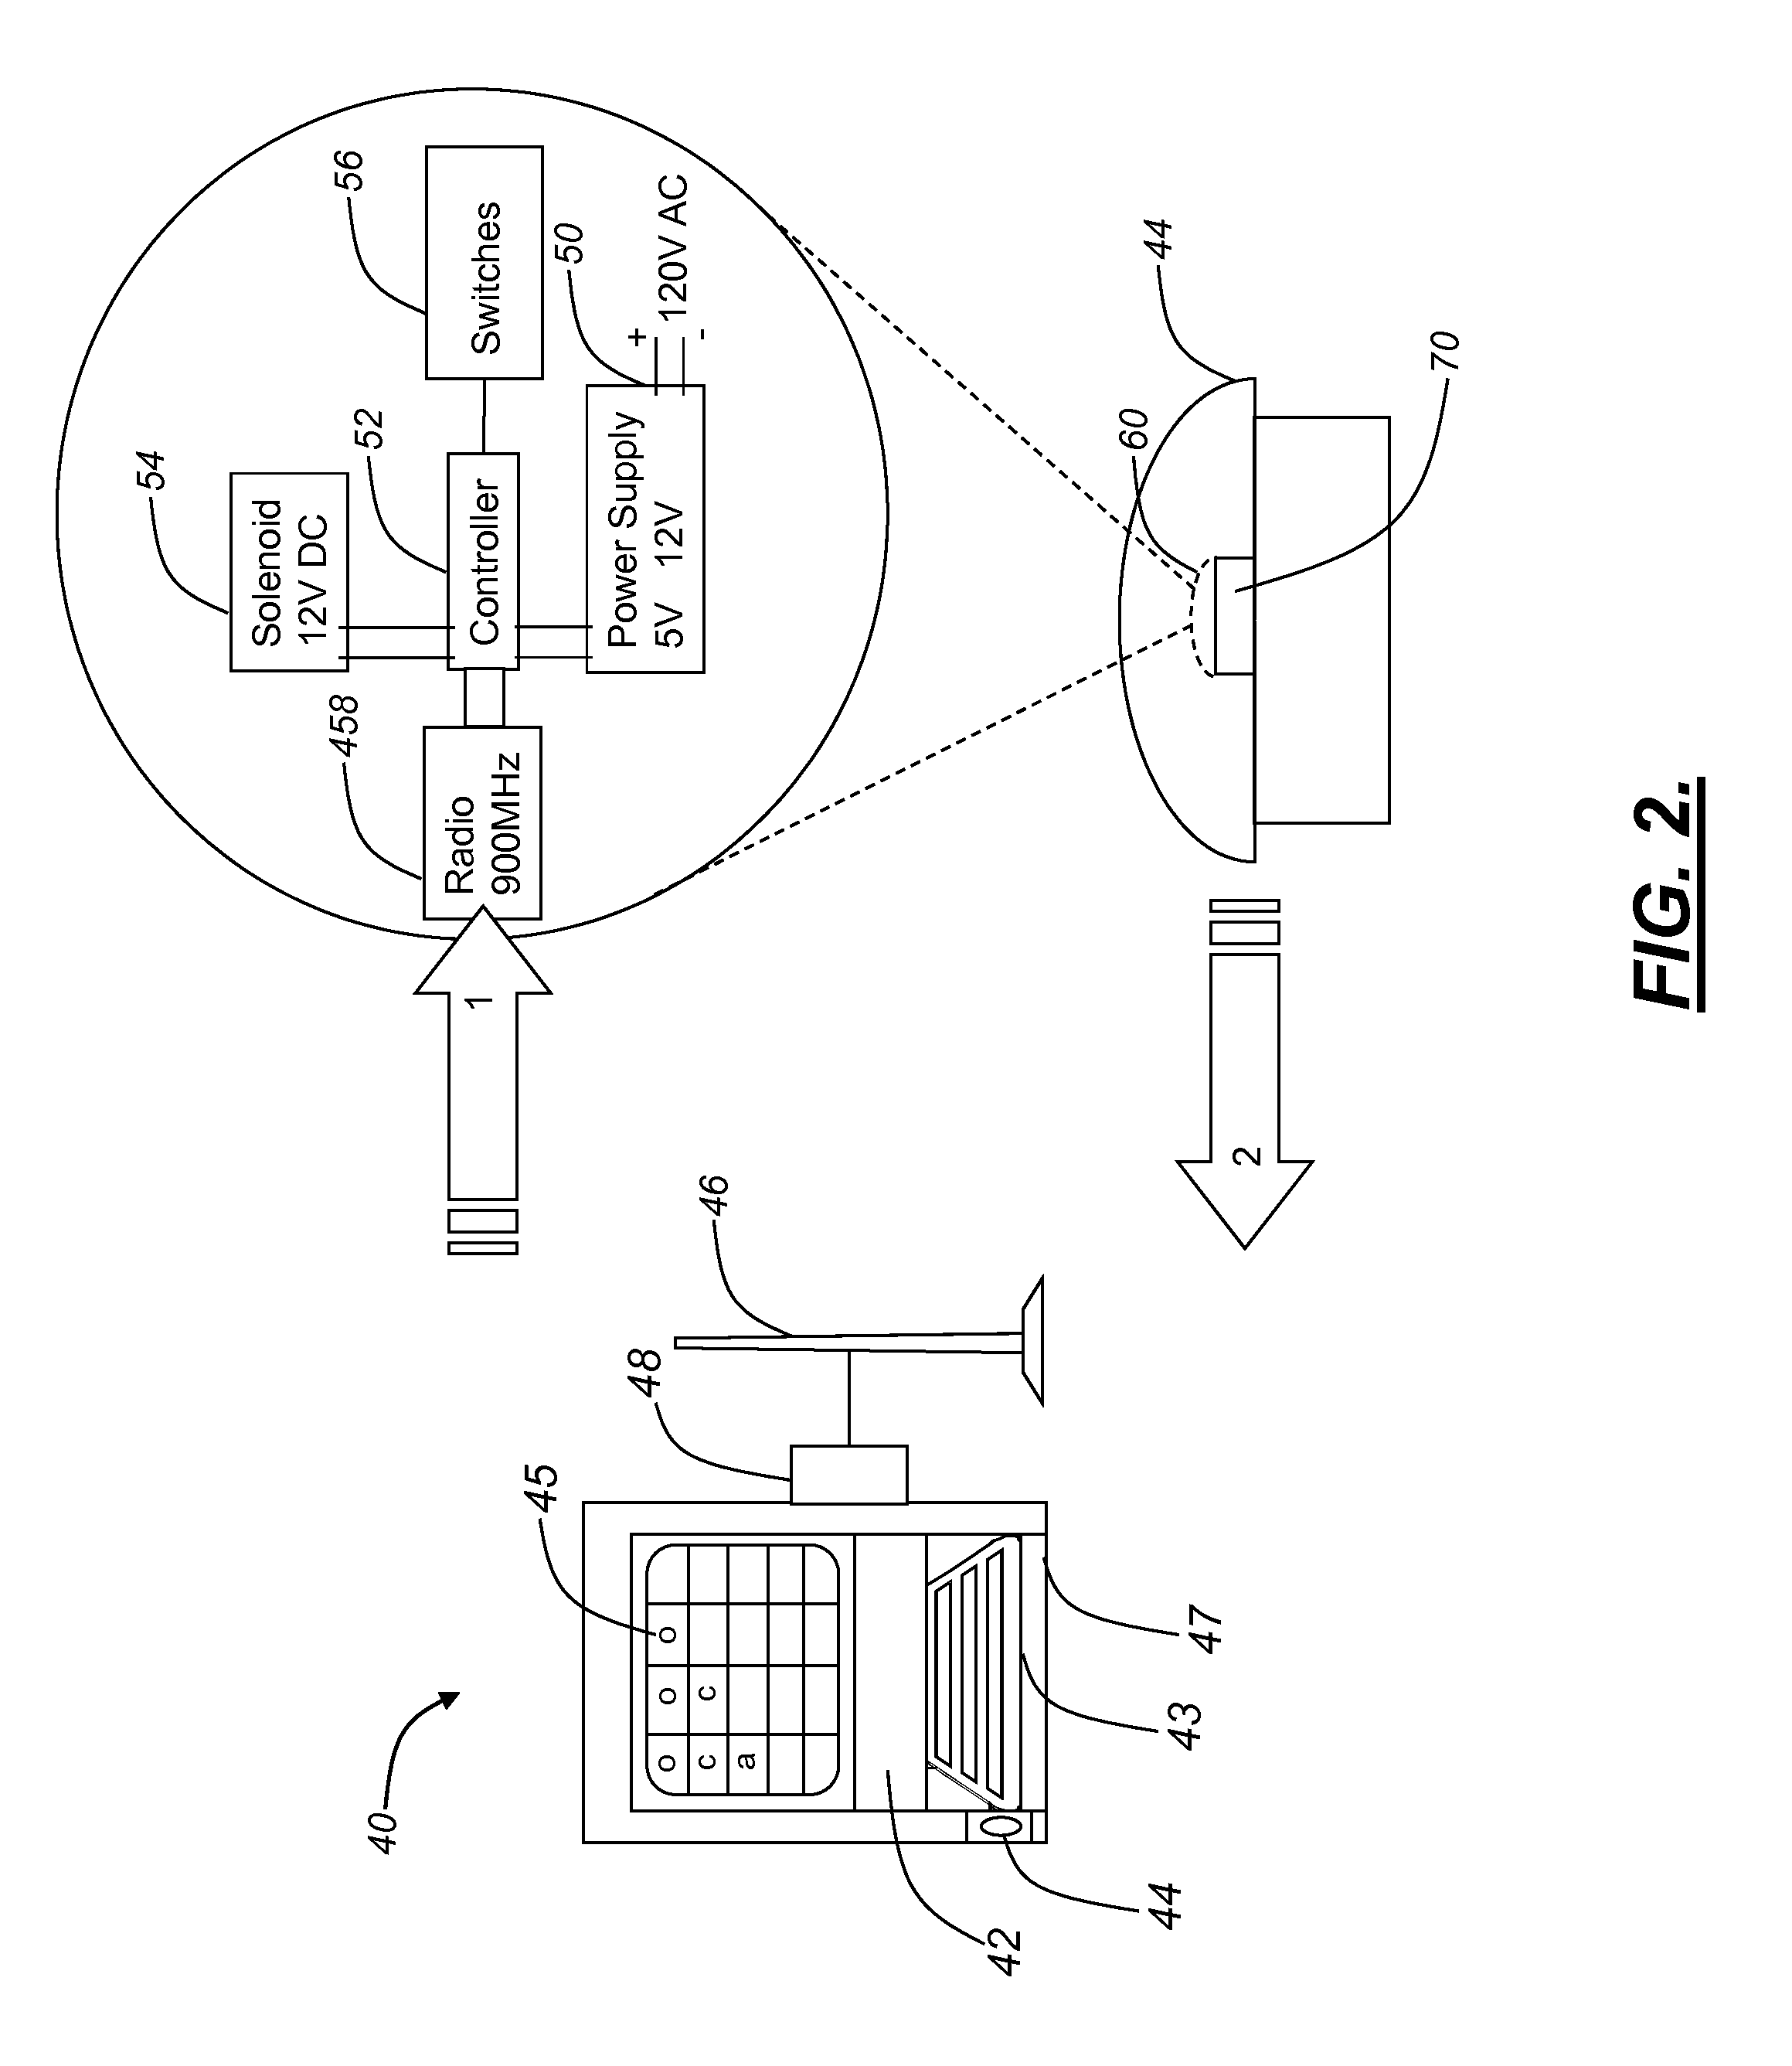 Asset security system and associated methods for selectively granting access